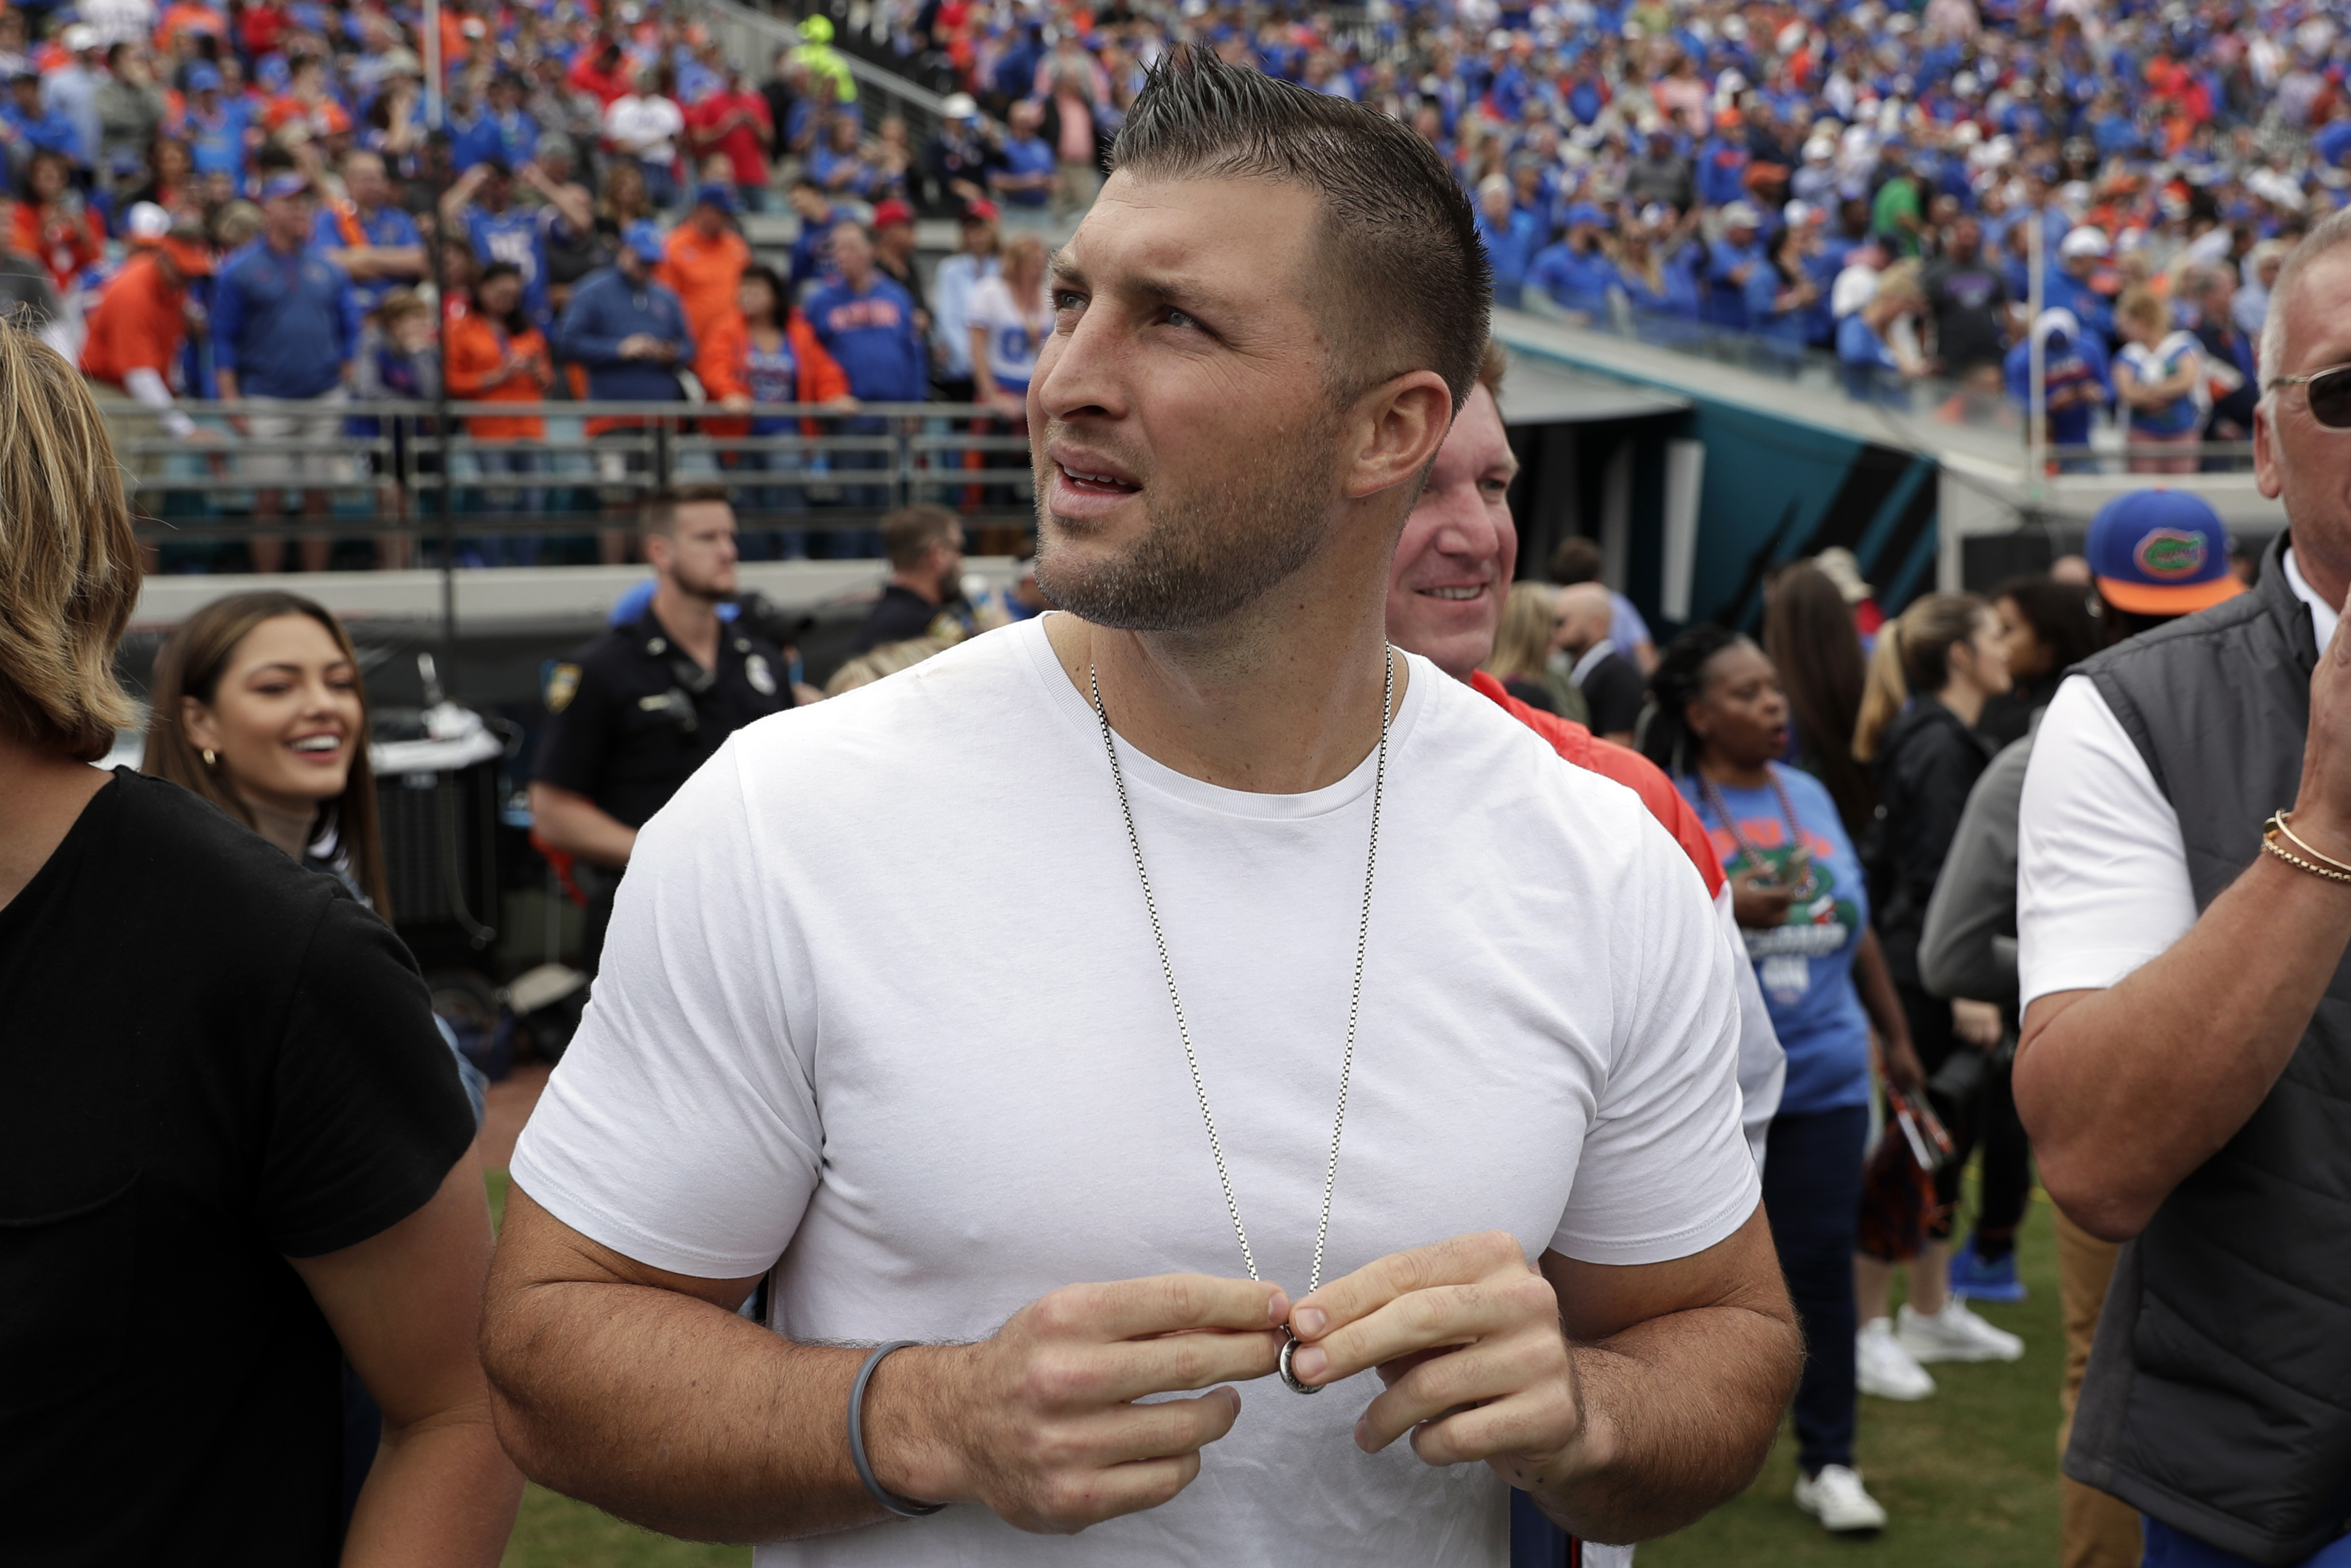 Tim Tebow has the top 5 best-selling items in NFL online shop